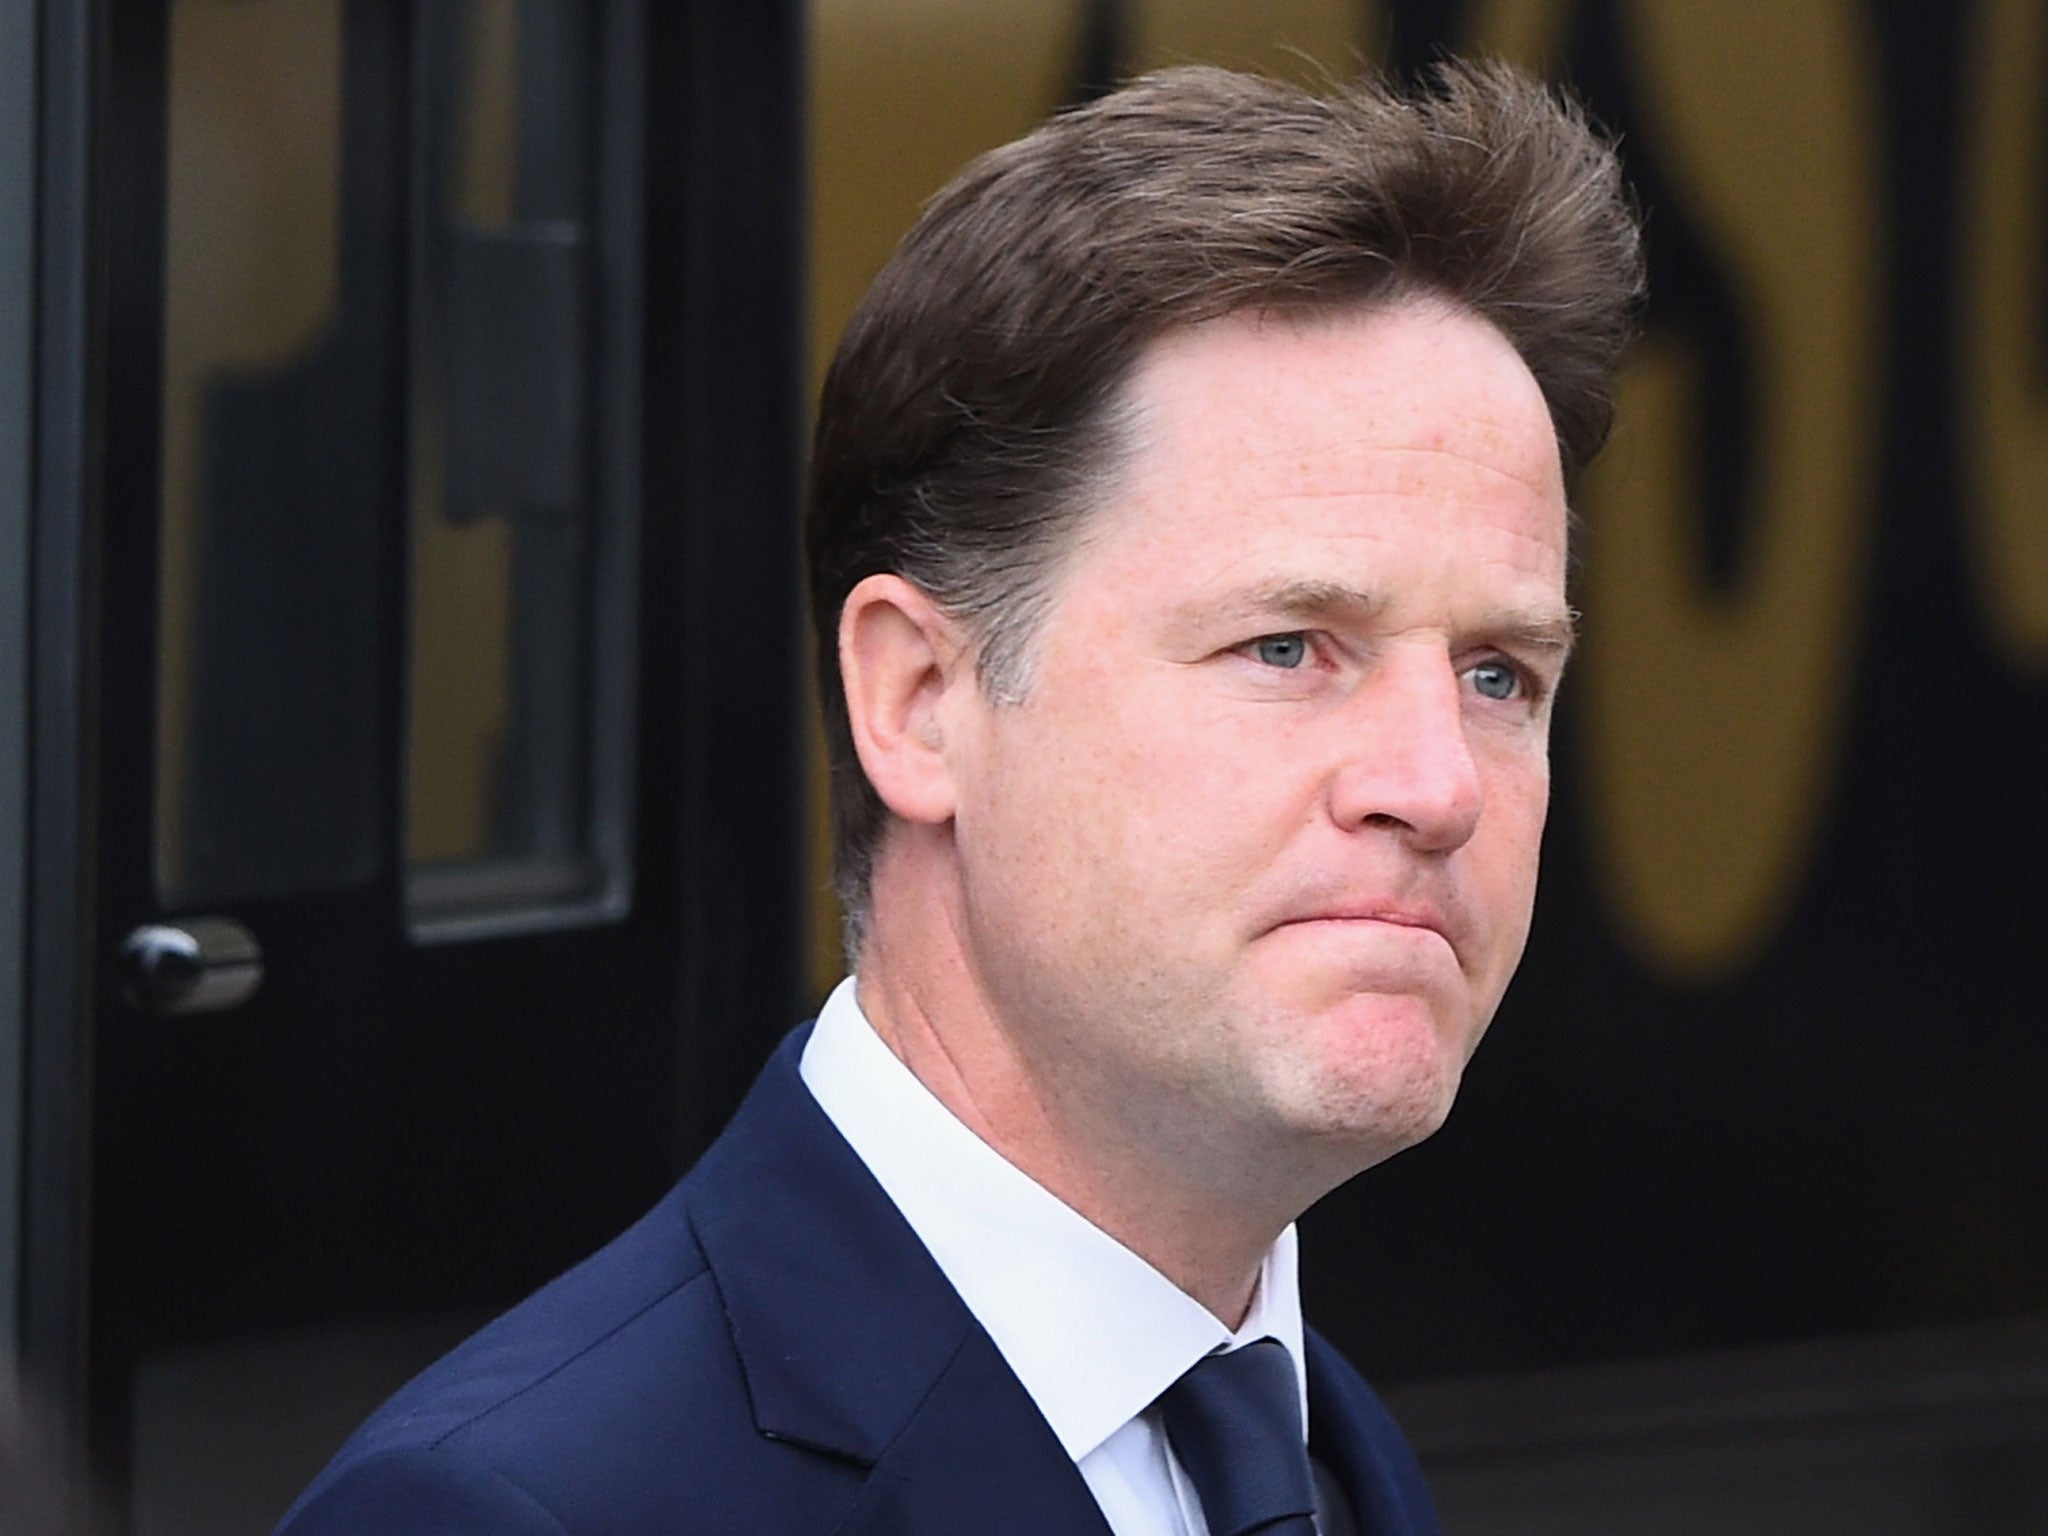 Nick Clegg, the MP for Sheffield Hallam, says the monument should return to the city